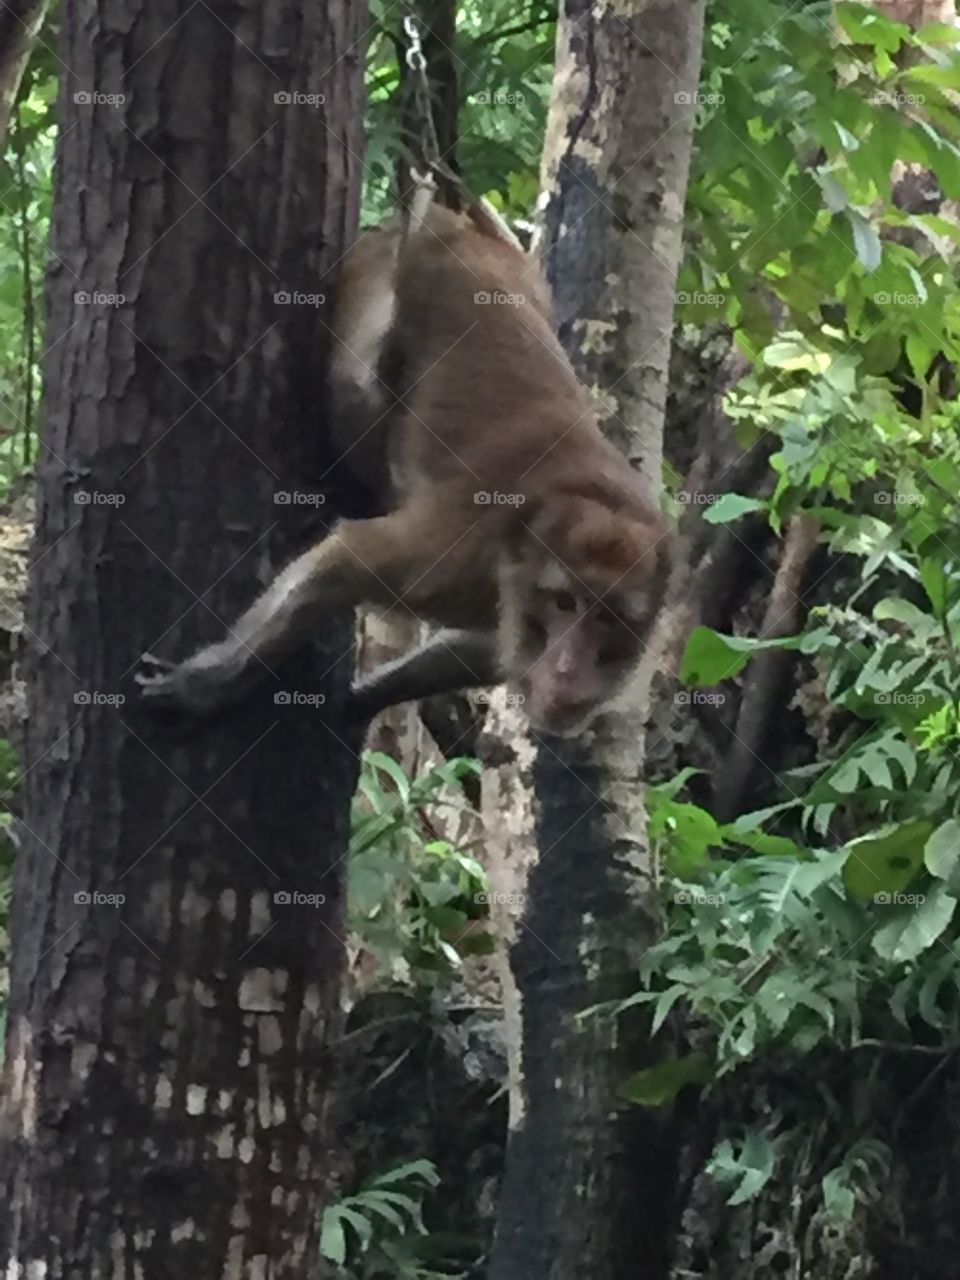 Hello there mr. Monkey!